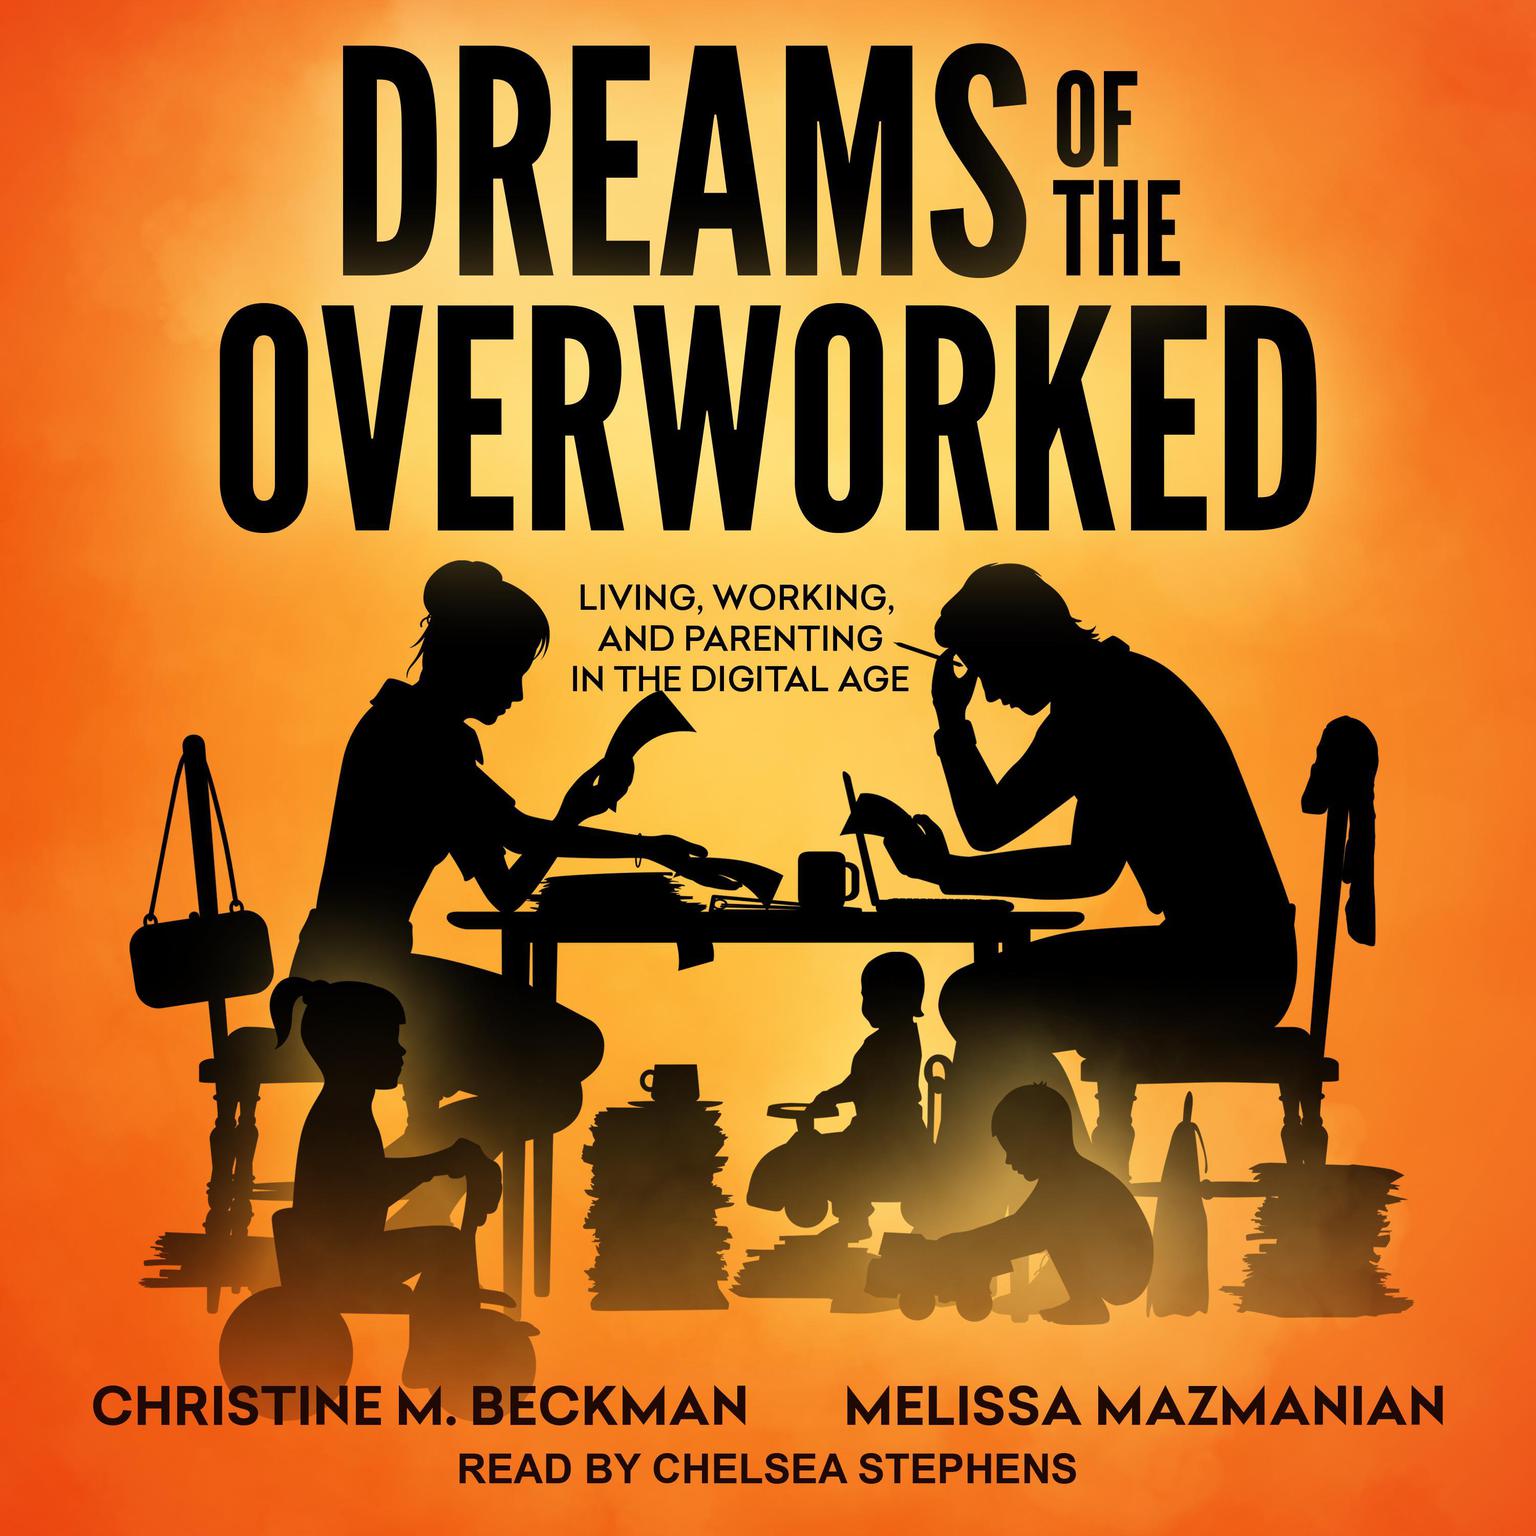 Dreams of the Overworked: Living, Working, and Parenting in the Digital Age Audiobook, by Christine M. Beckman